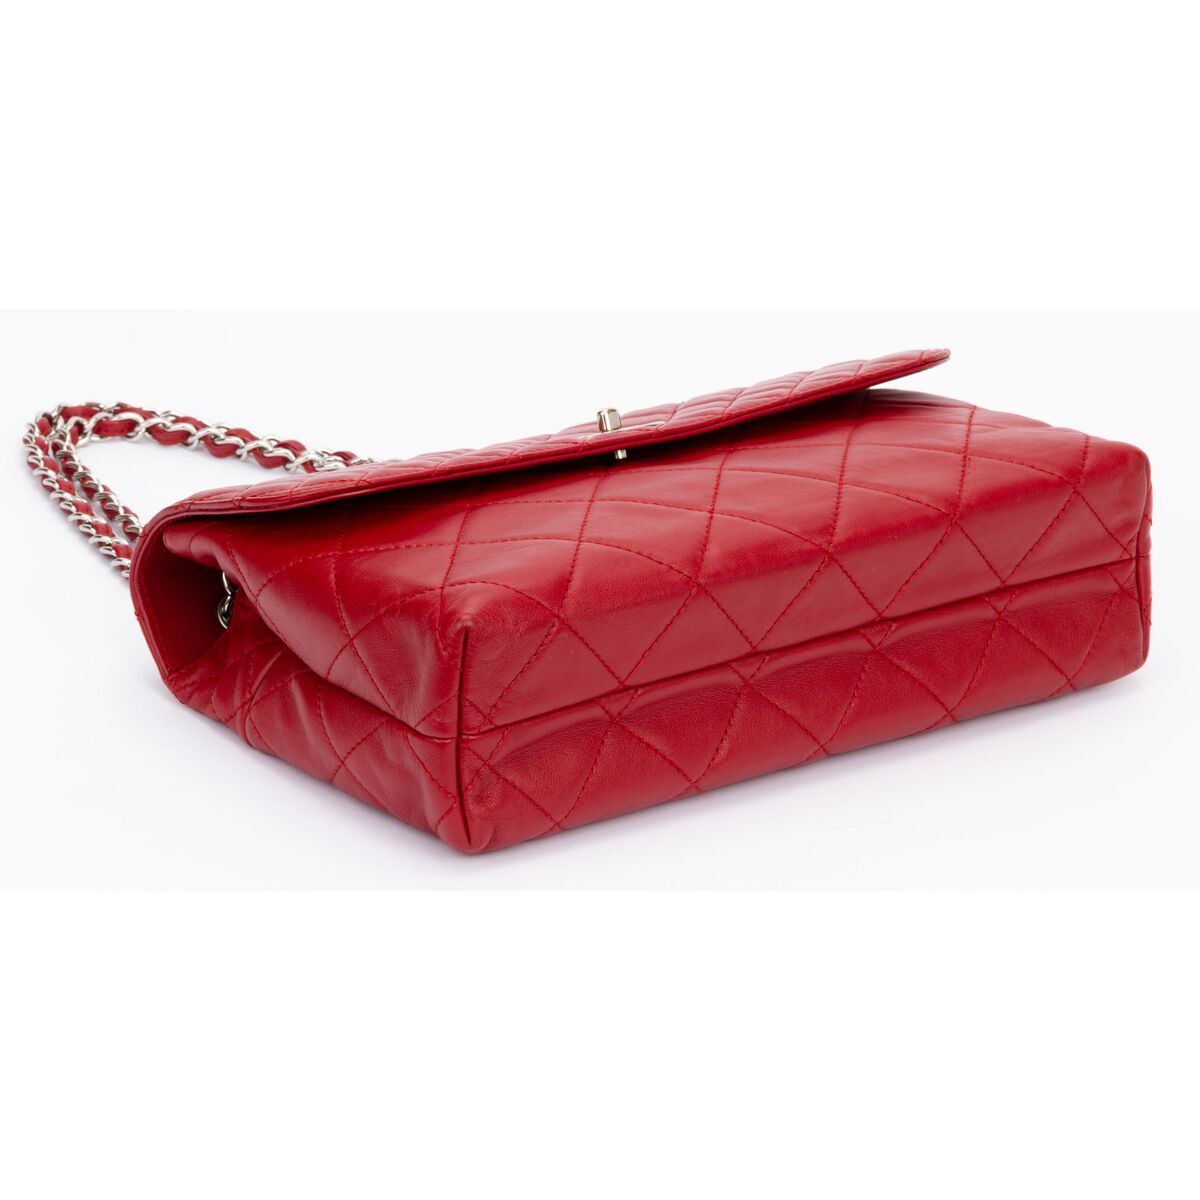 red leather chanel bag authentic